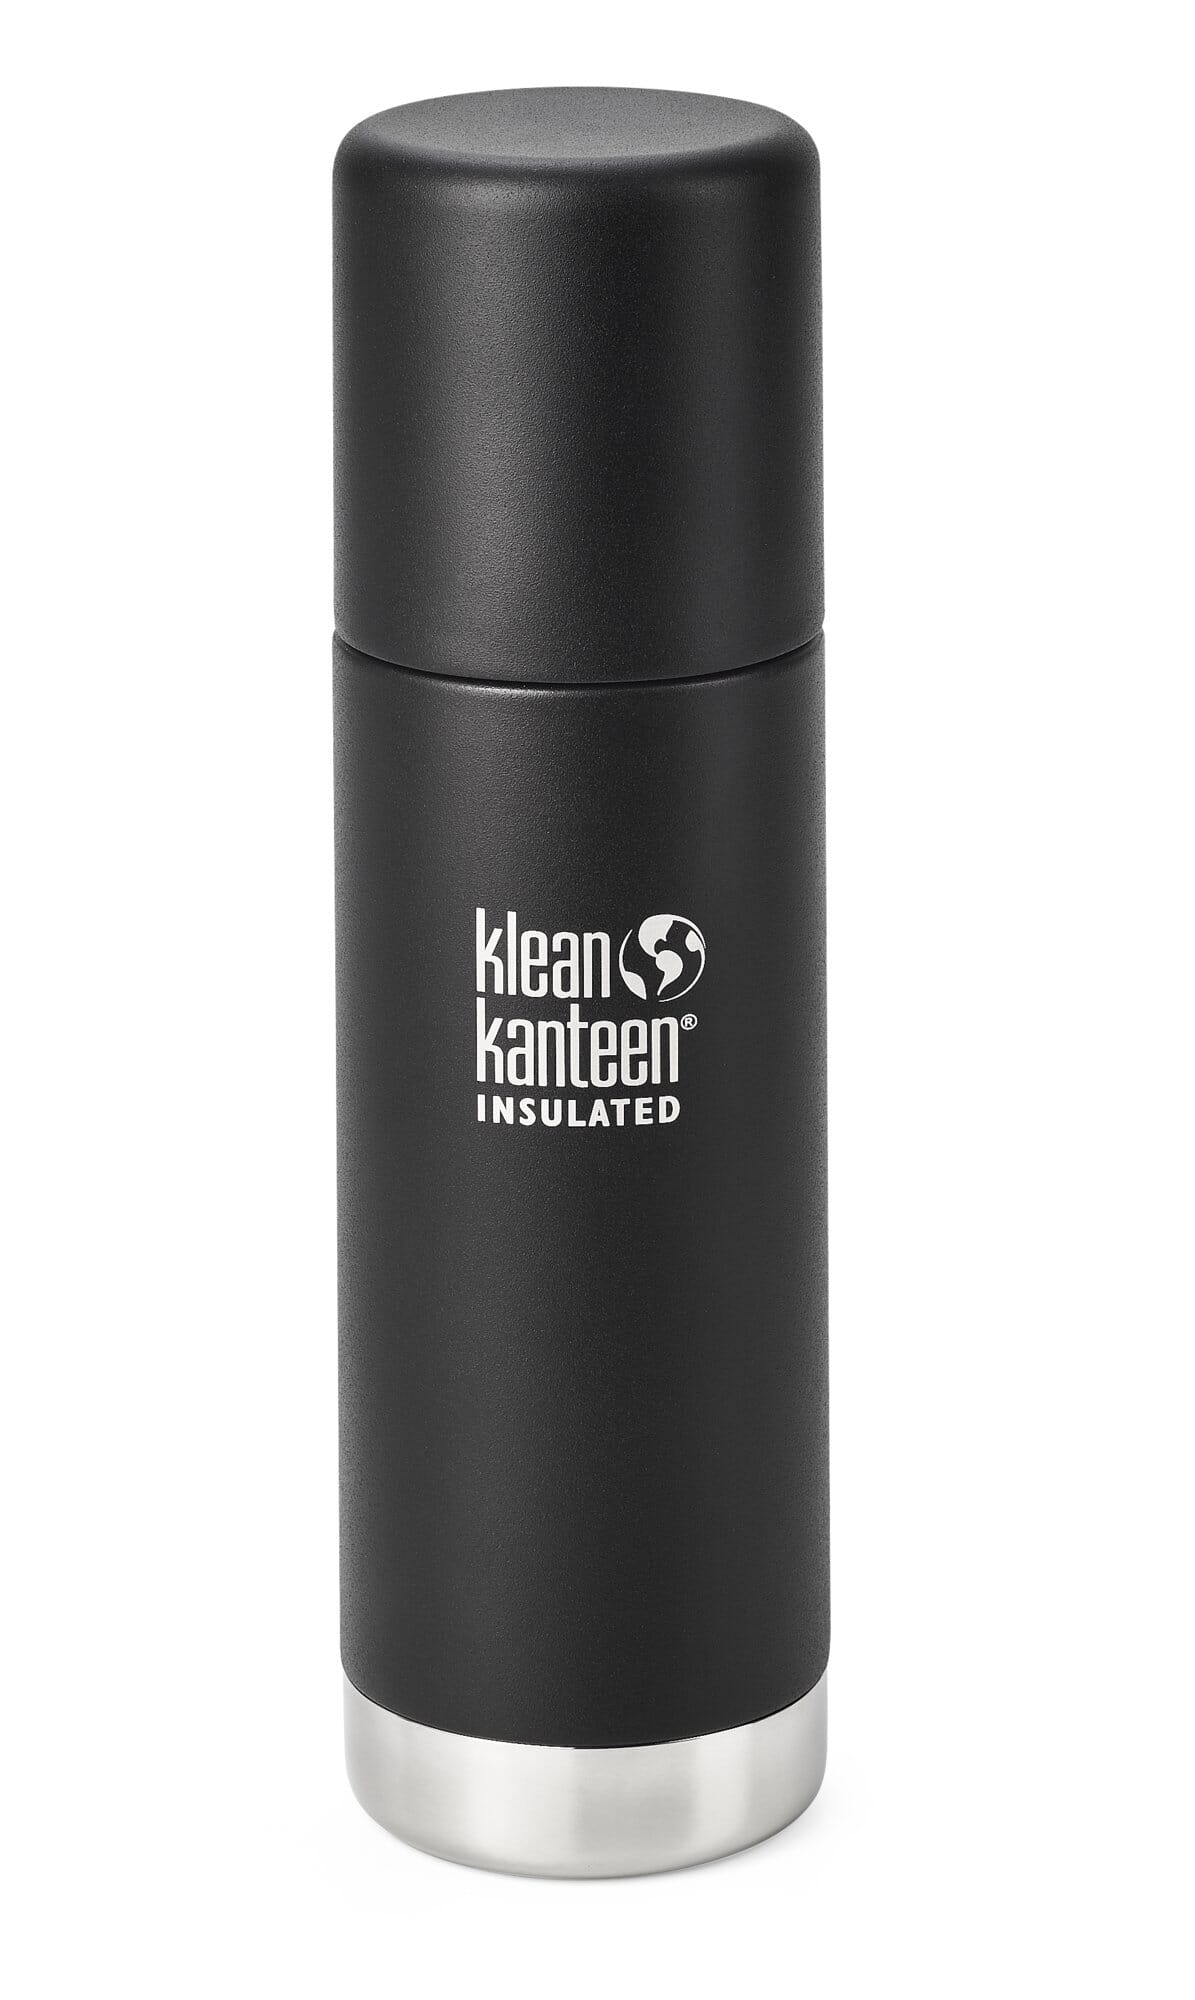 Klean Kanteen's TKPro is Our Favorite Everyday Insulated Water Bottle